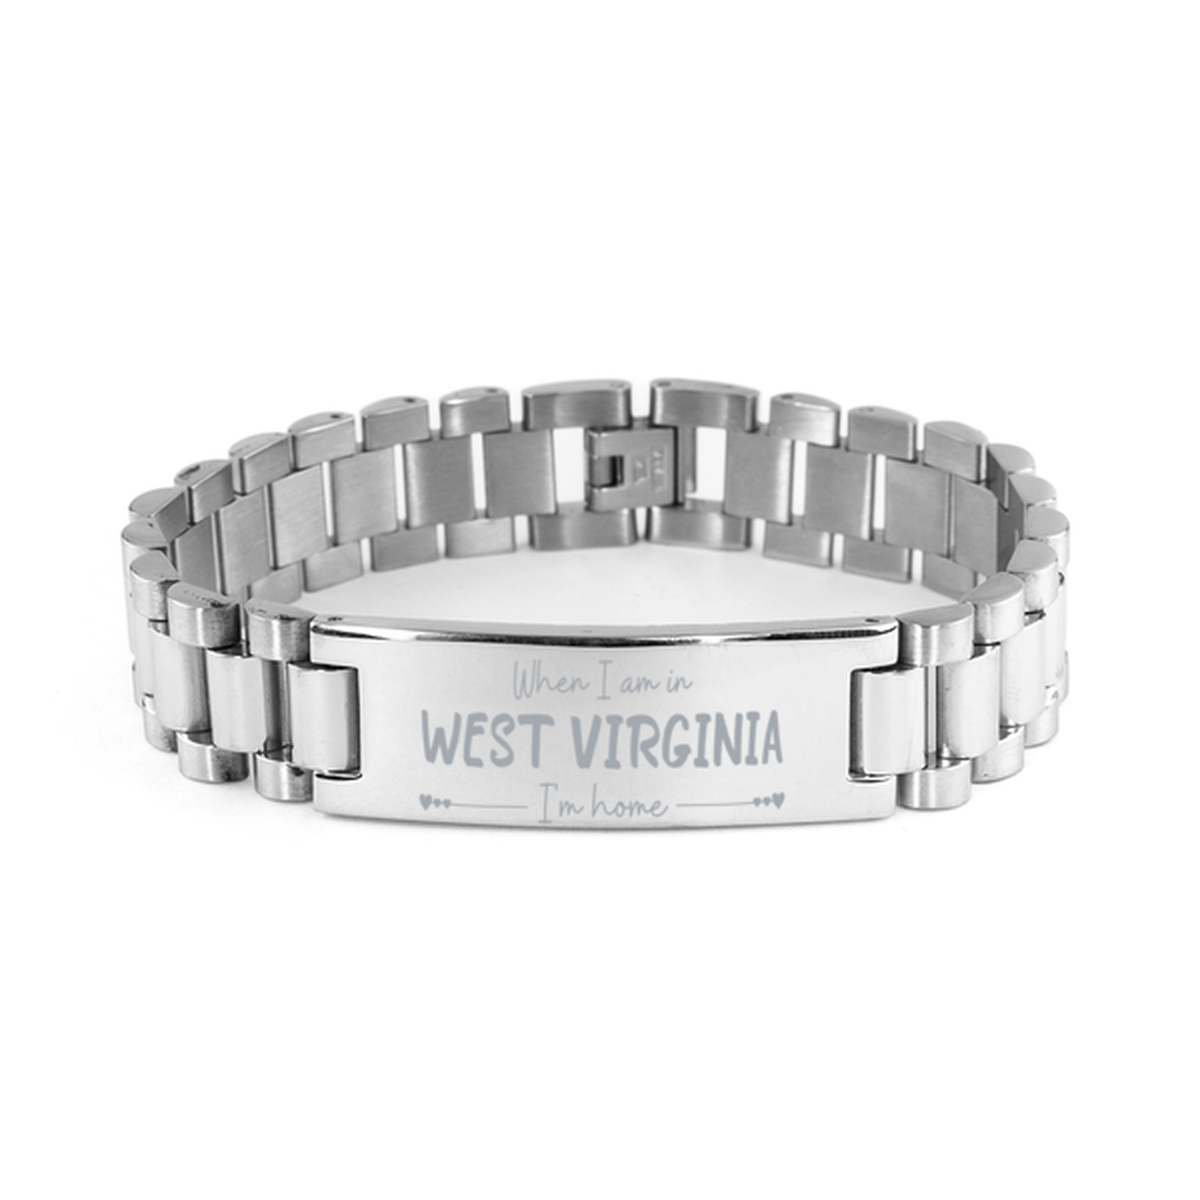 When I am in West Virginia I'm home Ladder Stainless Steel Bracelet, Cheap Gifts For West Virginia, State West Virginia Birthday Gifts for Friends Coworker